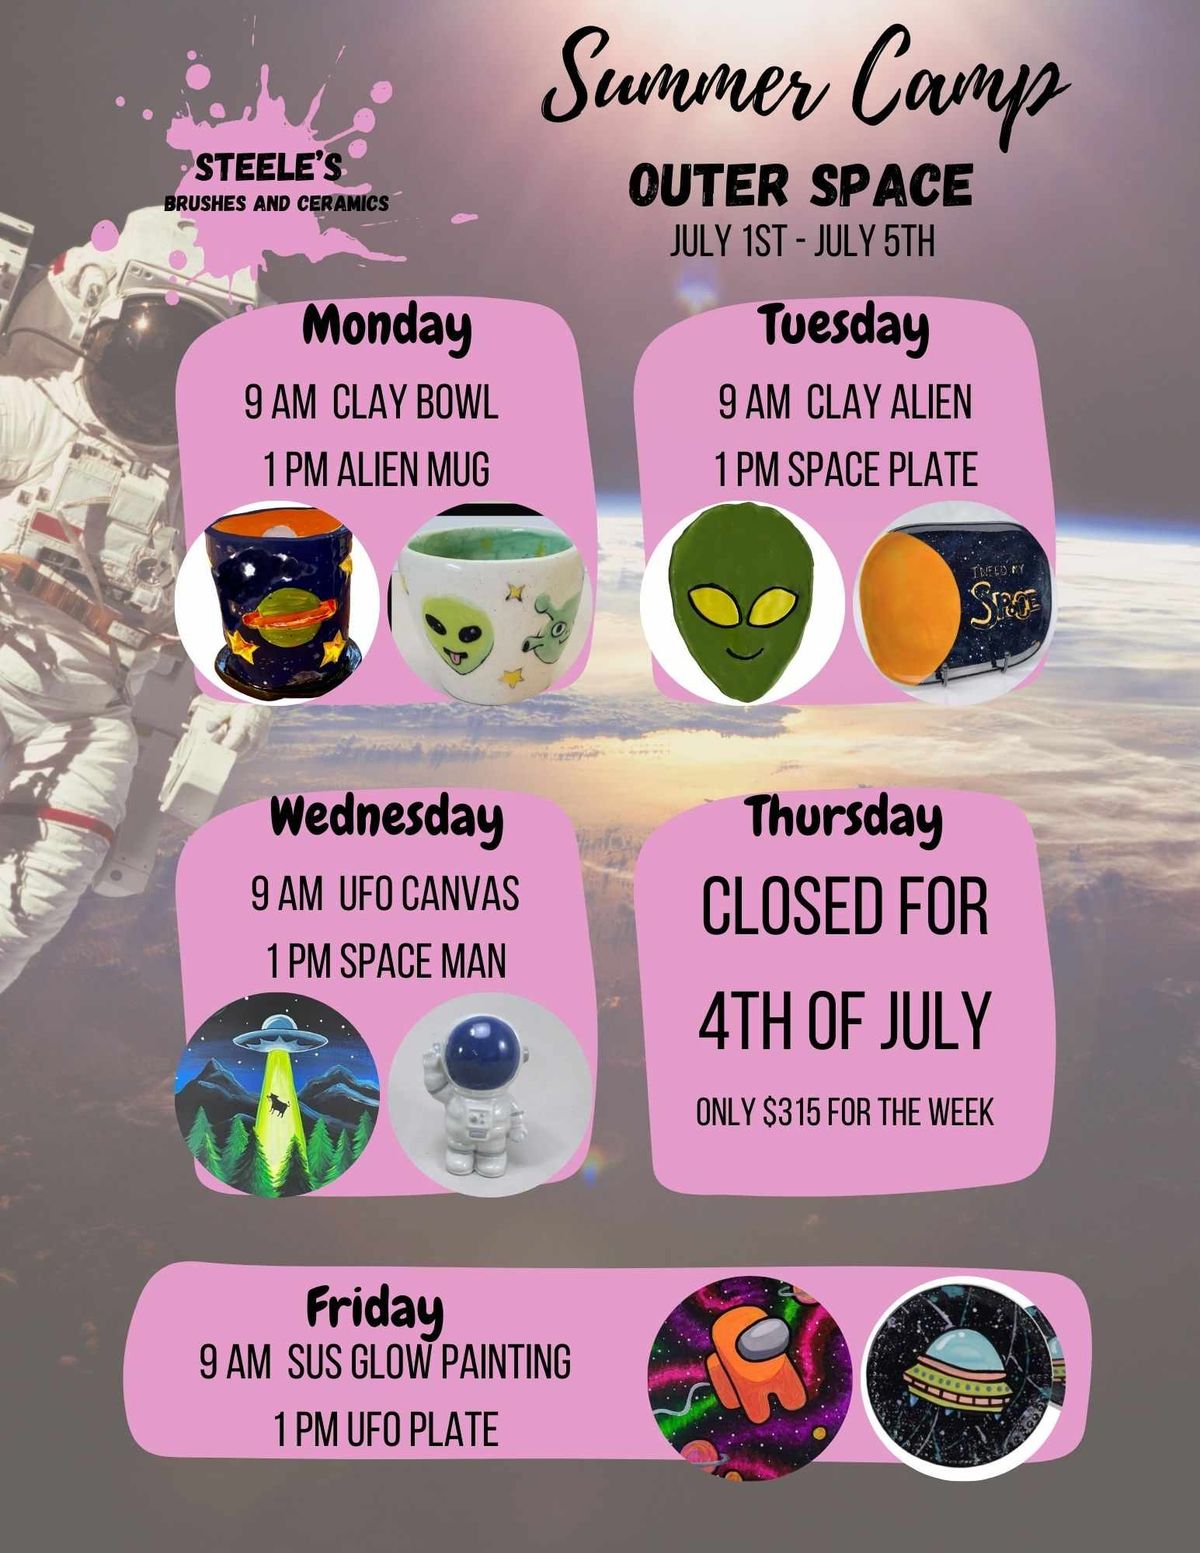 Summer Camp: Outer Space July 1st - July 5th